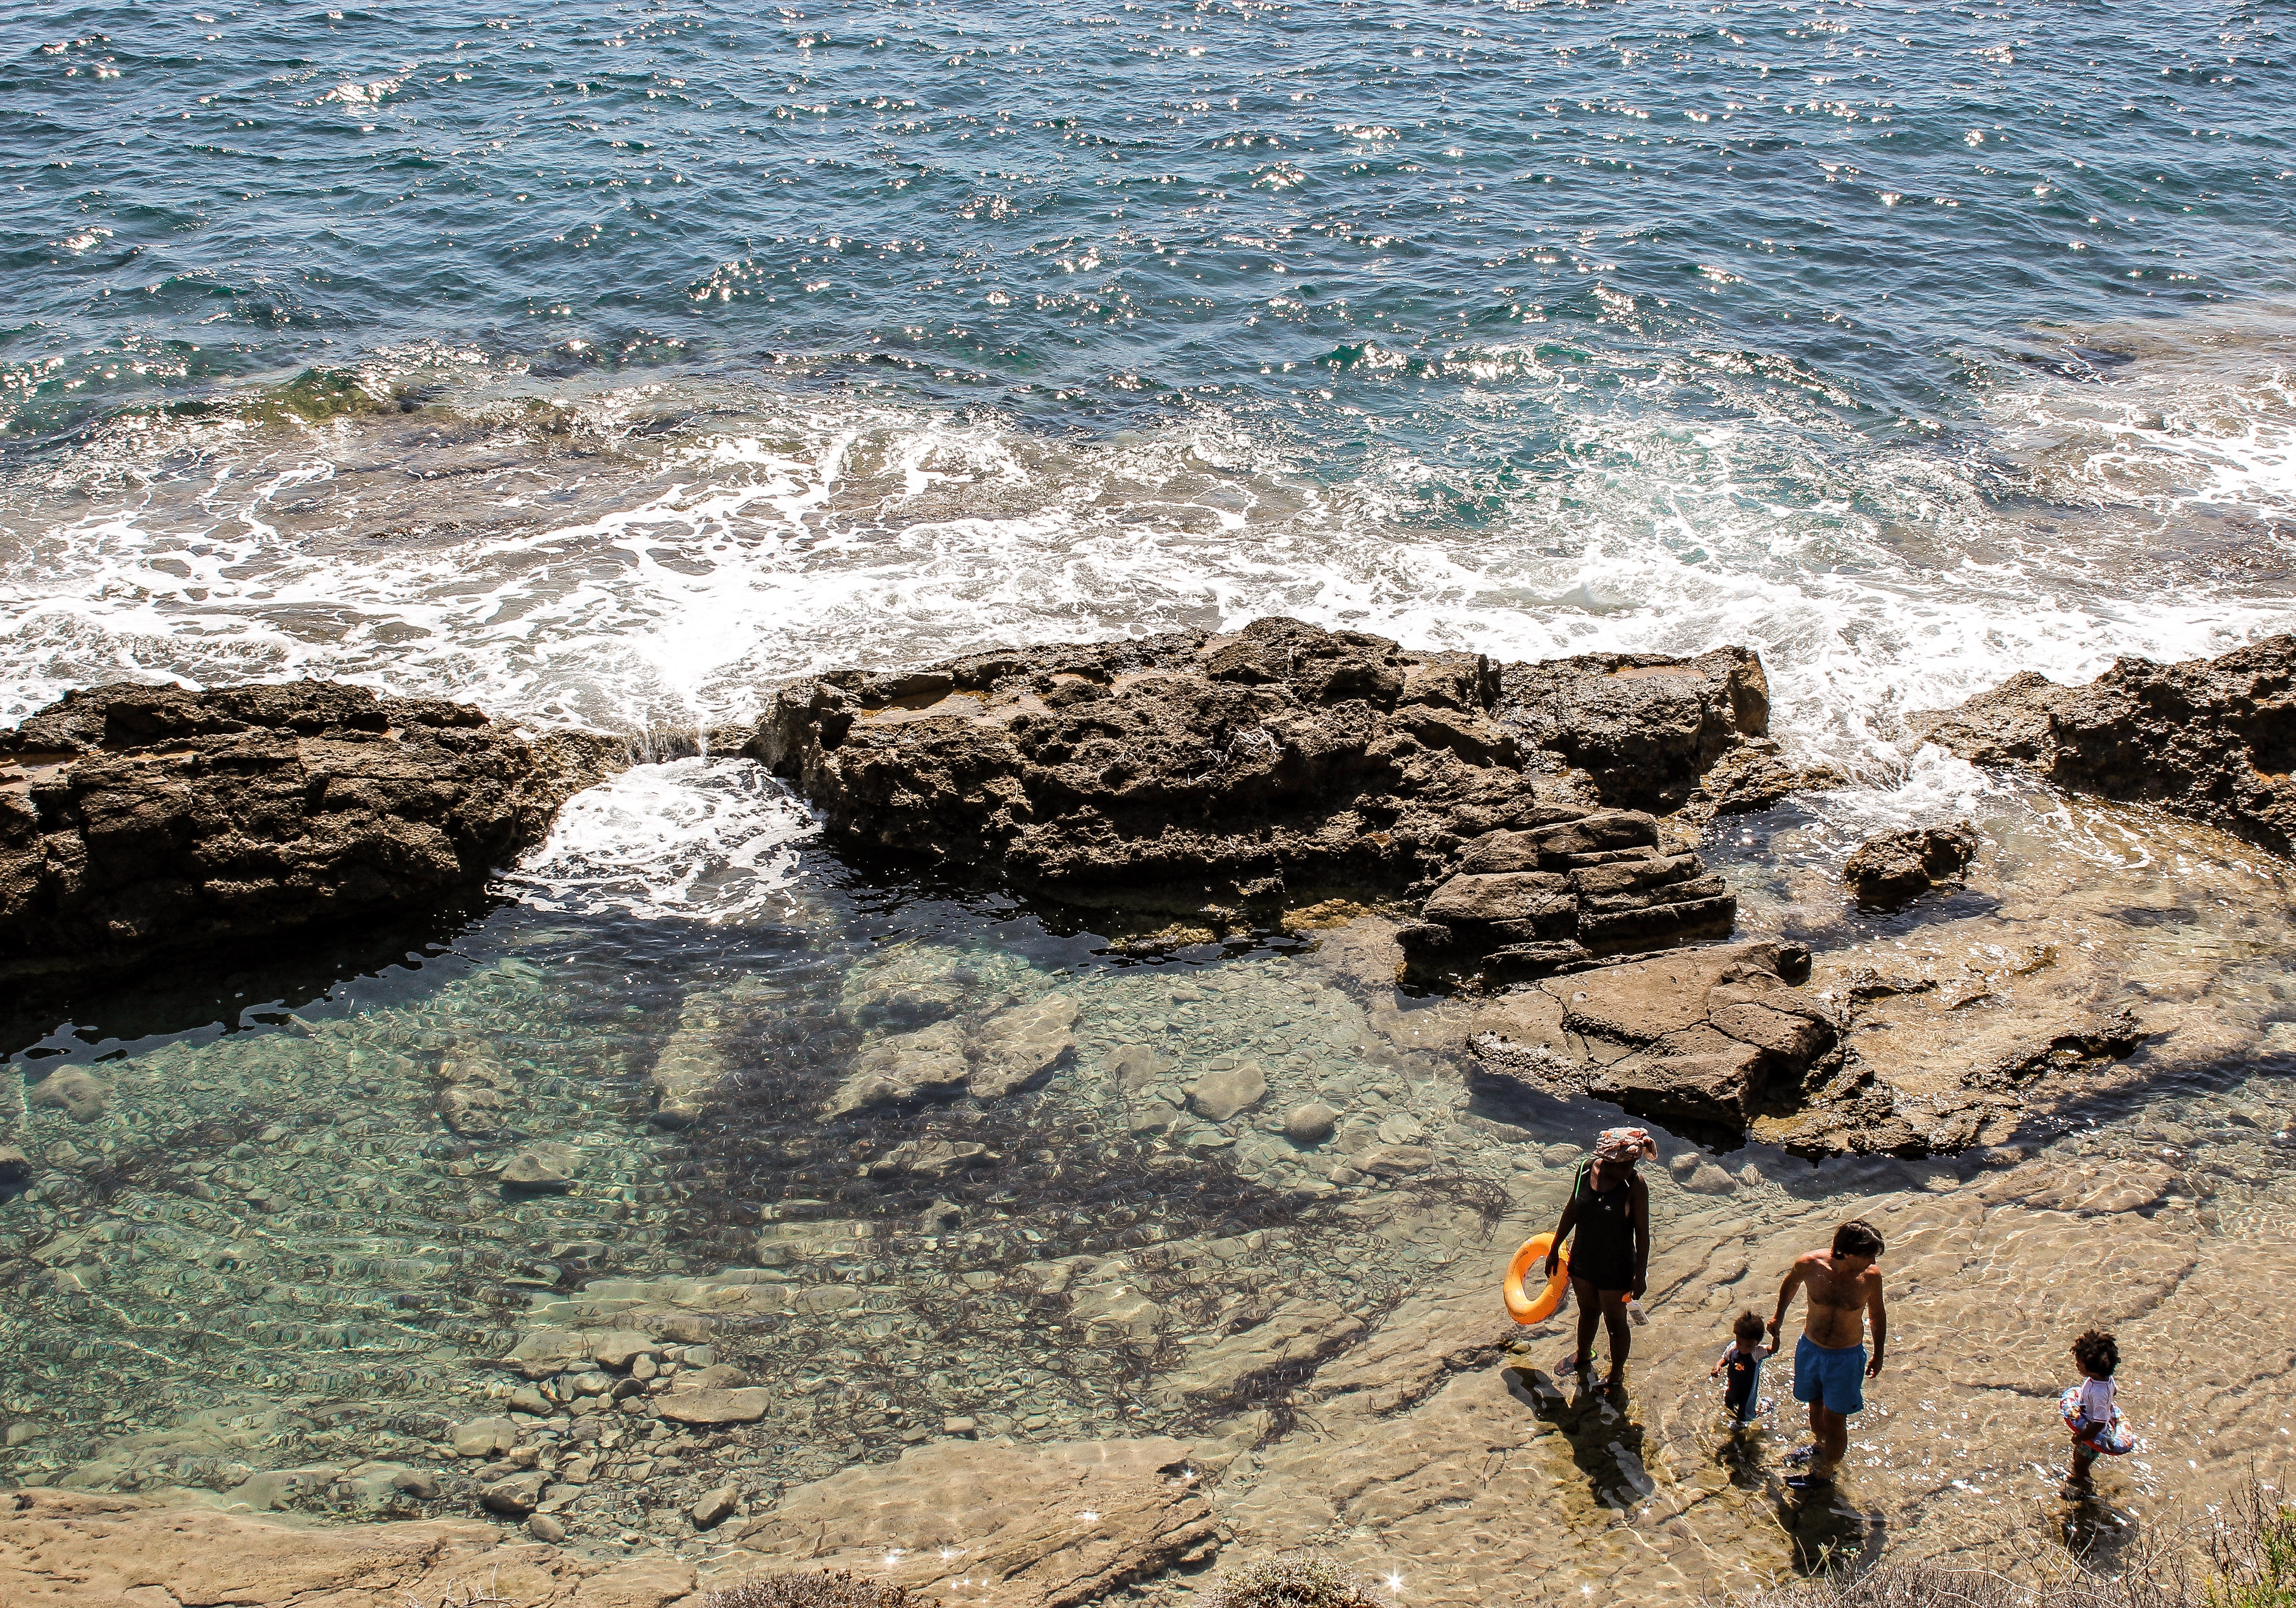 People standing in a rocky tidal pool on the shore of the ocean